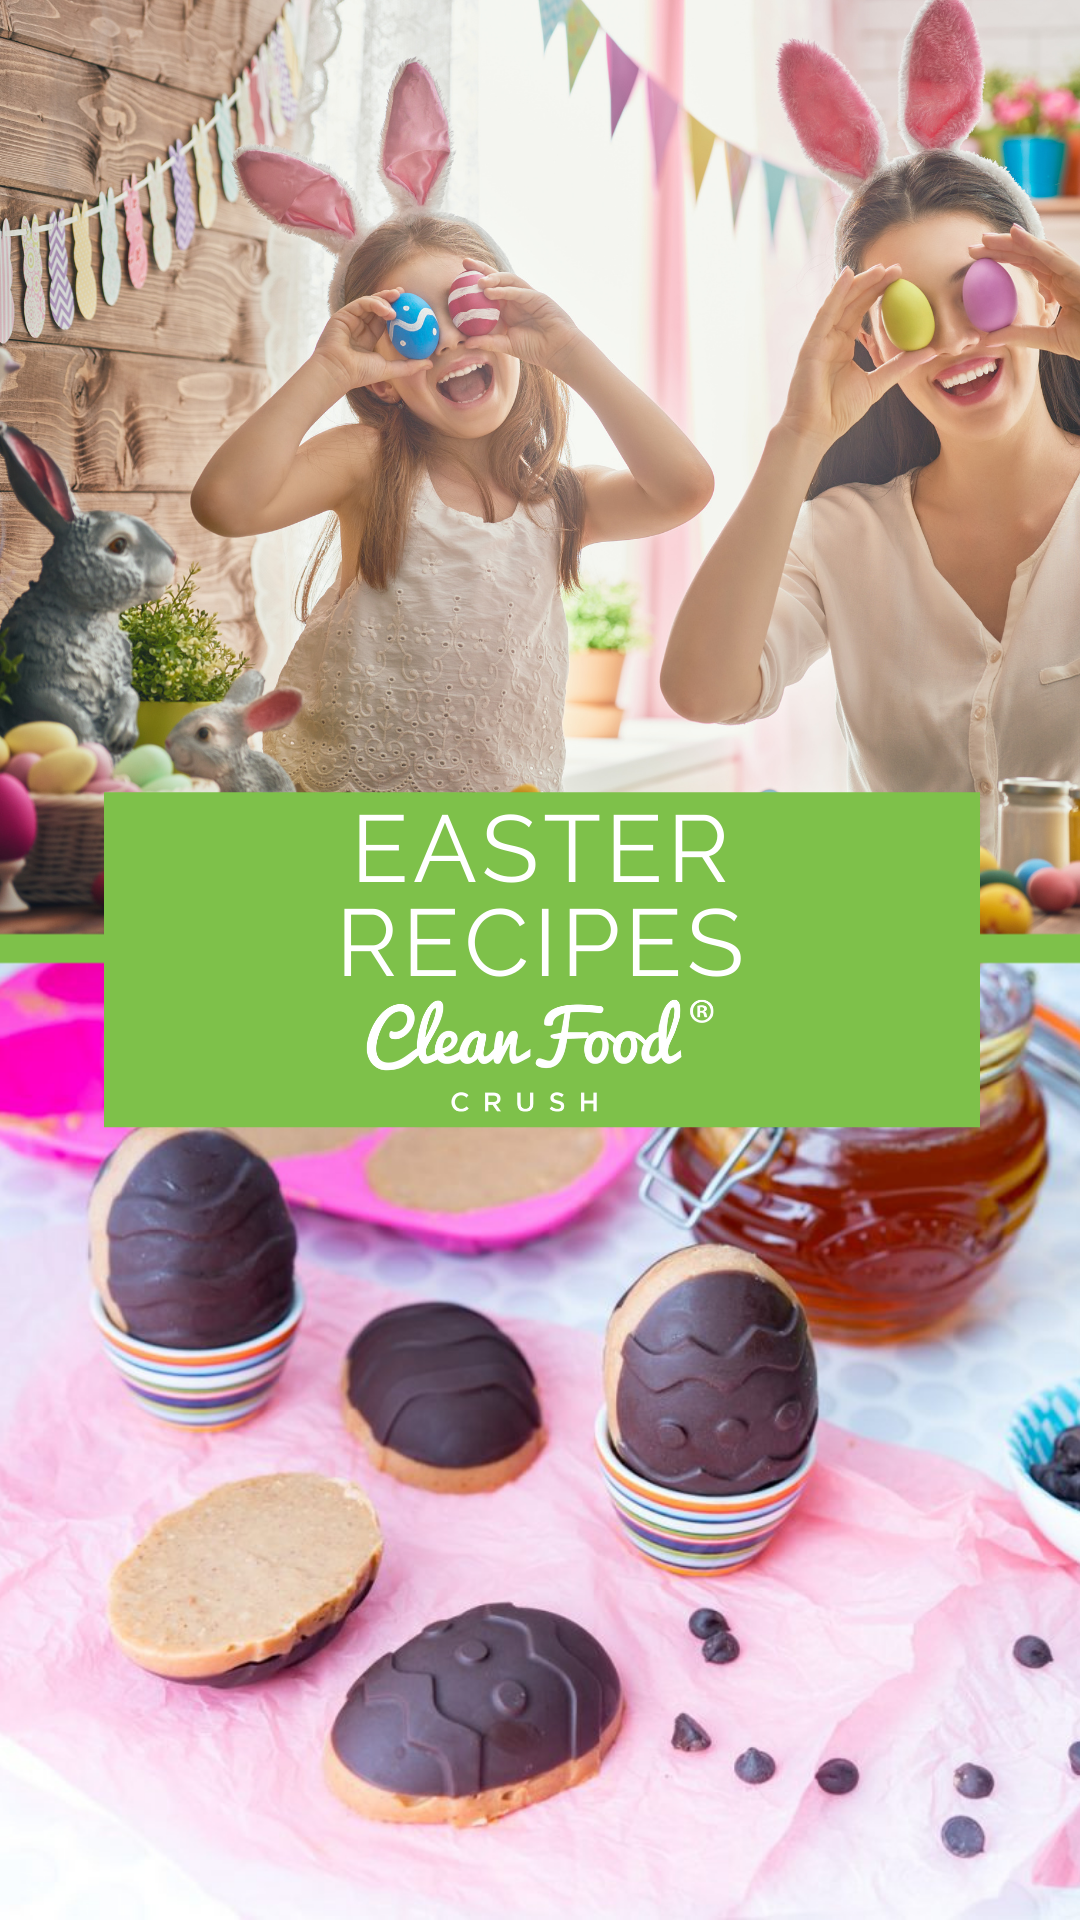 Healthy Kitchen Hacks - Easter Edition